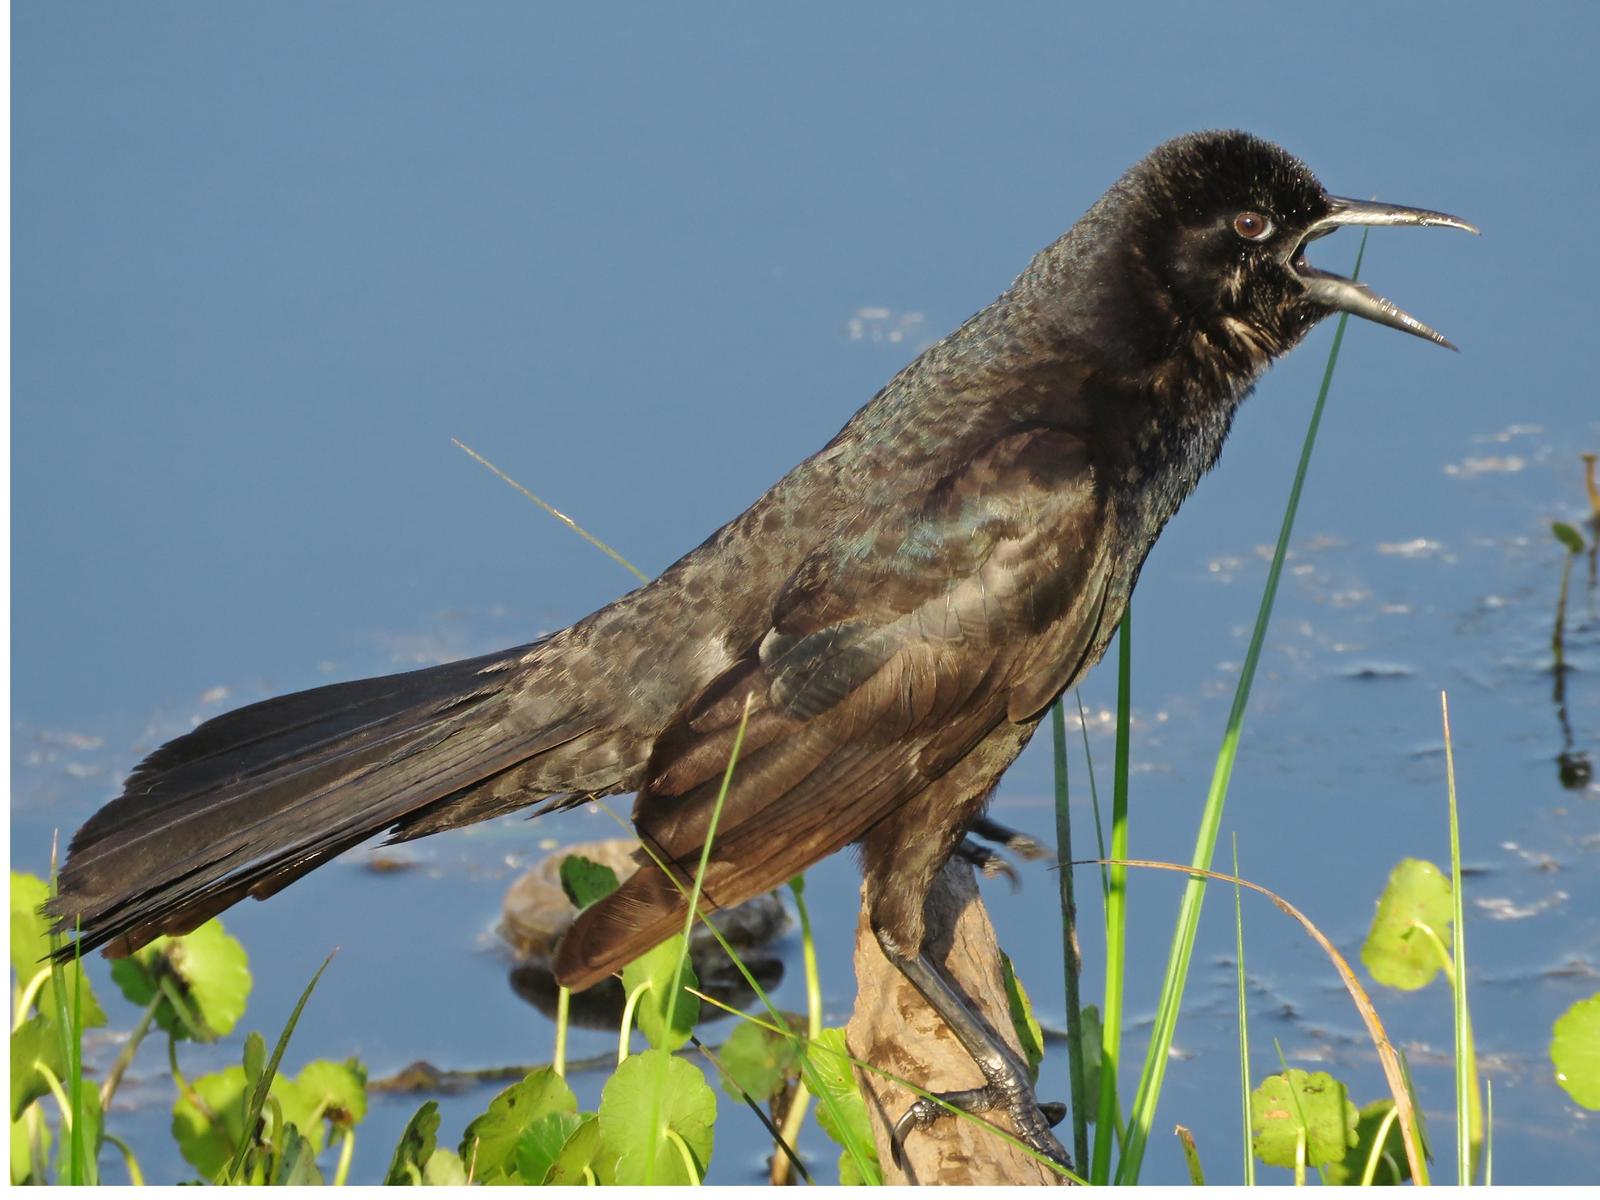 Boat-tailed Grackle Photo by Bob Neugebauer